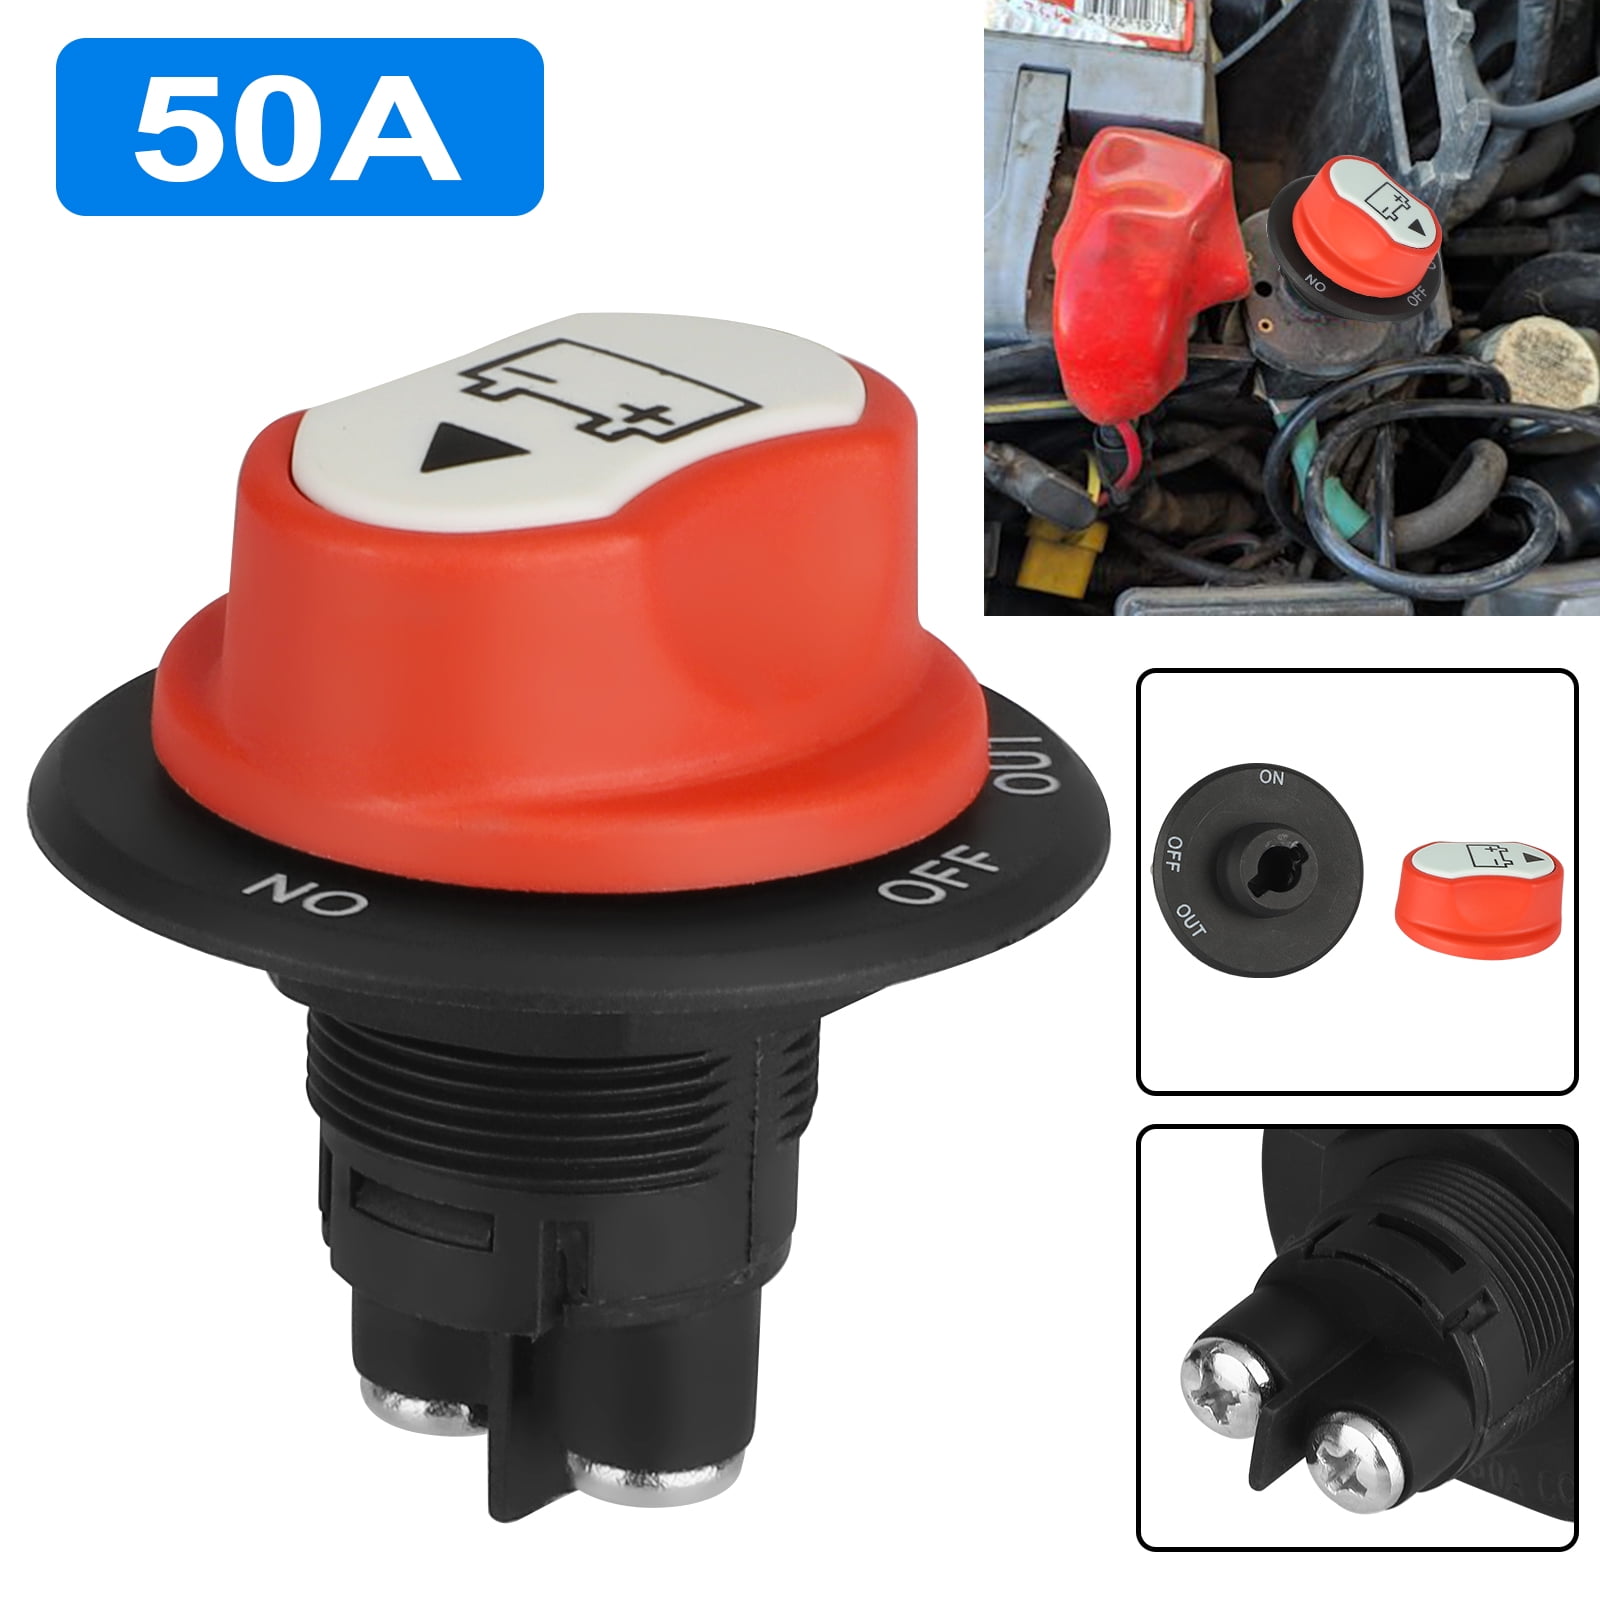 12V 200A Power Isolator ONOff Switch Durable Shut Off Battery Switch Power Master Disconnect Kill Switch for Car Small Yacht Camper Truck RV SUV Motorcycle Car Accessories 